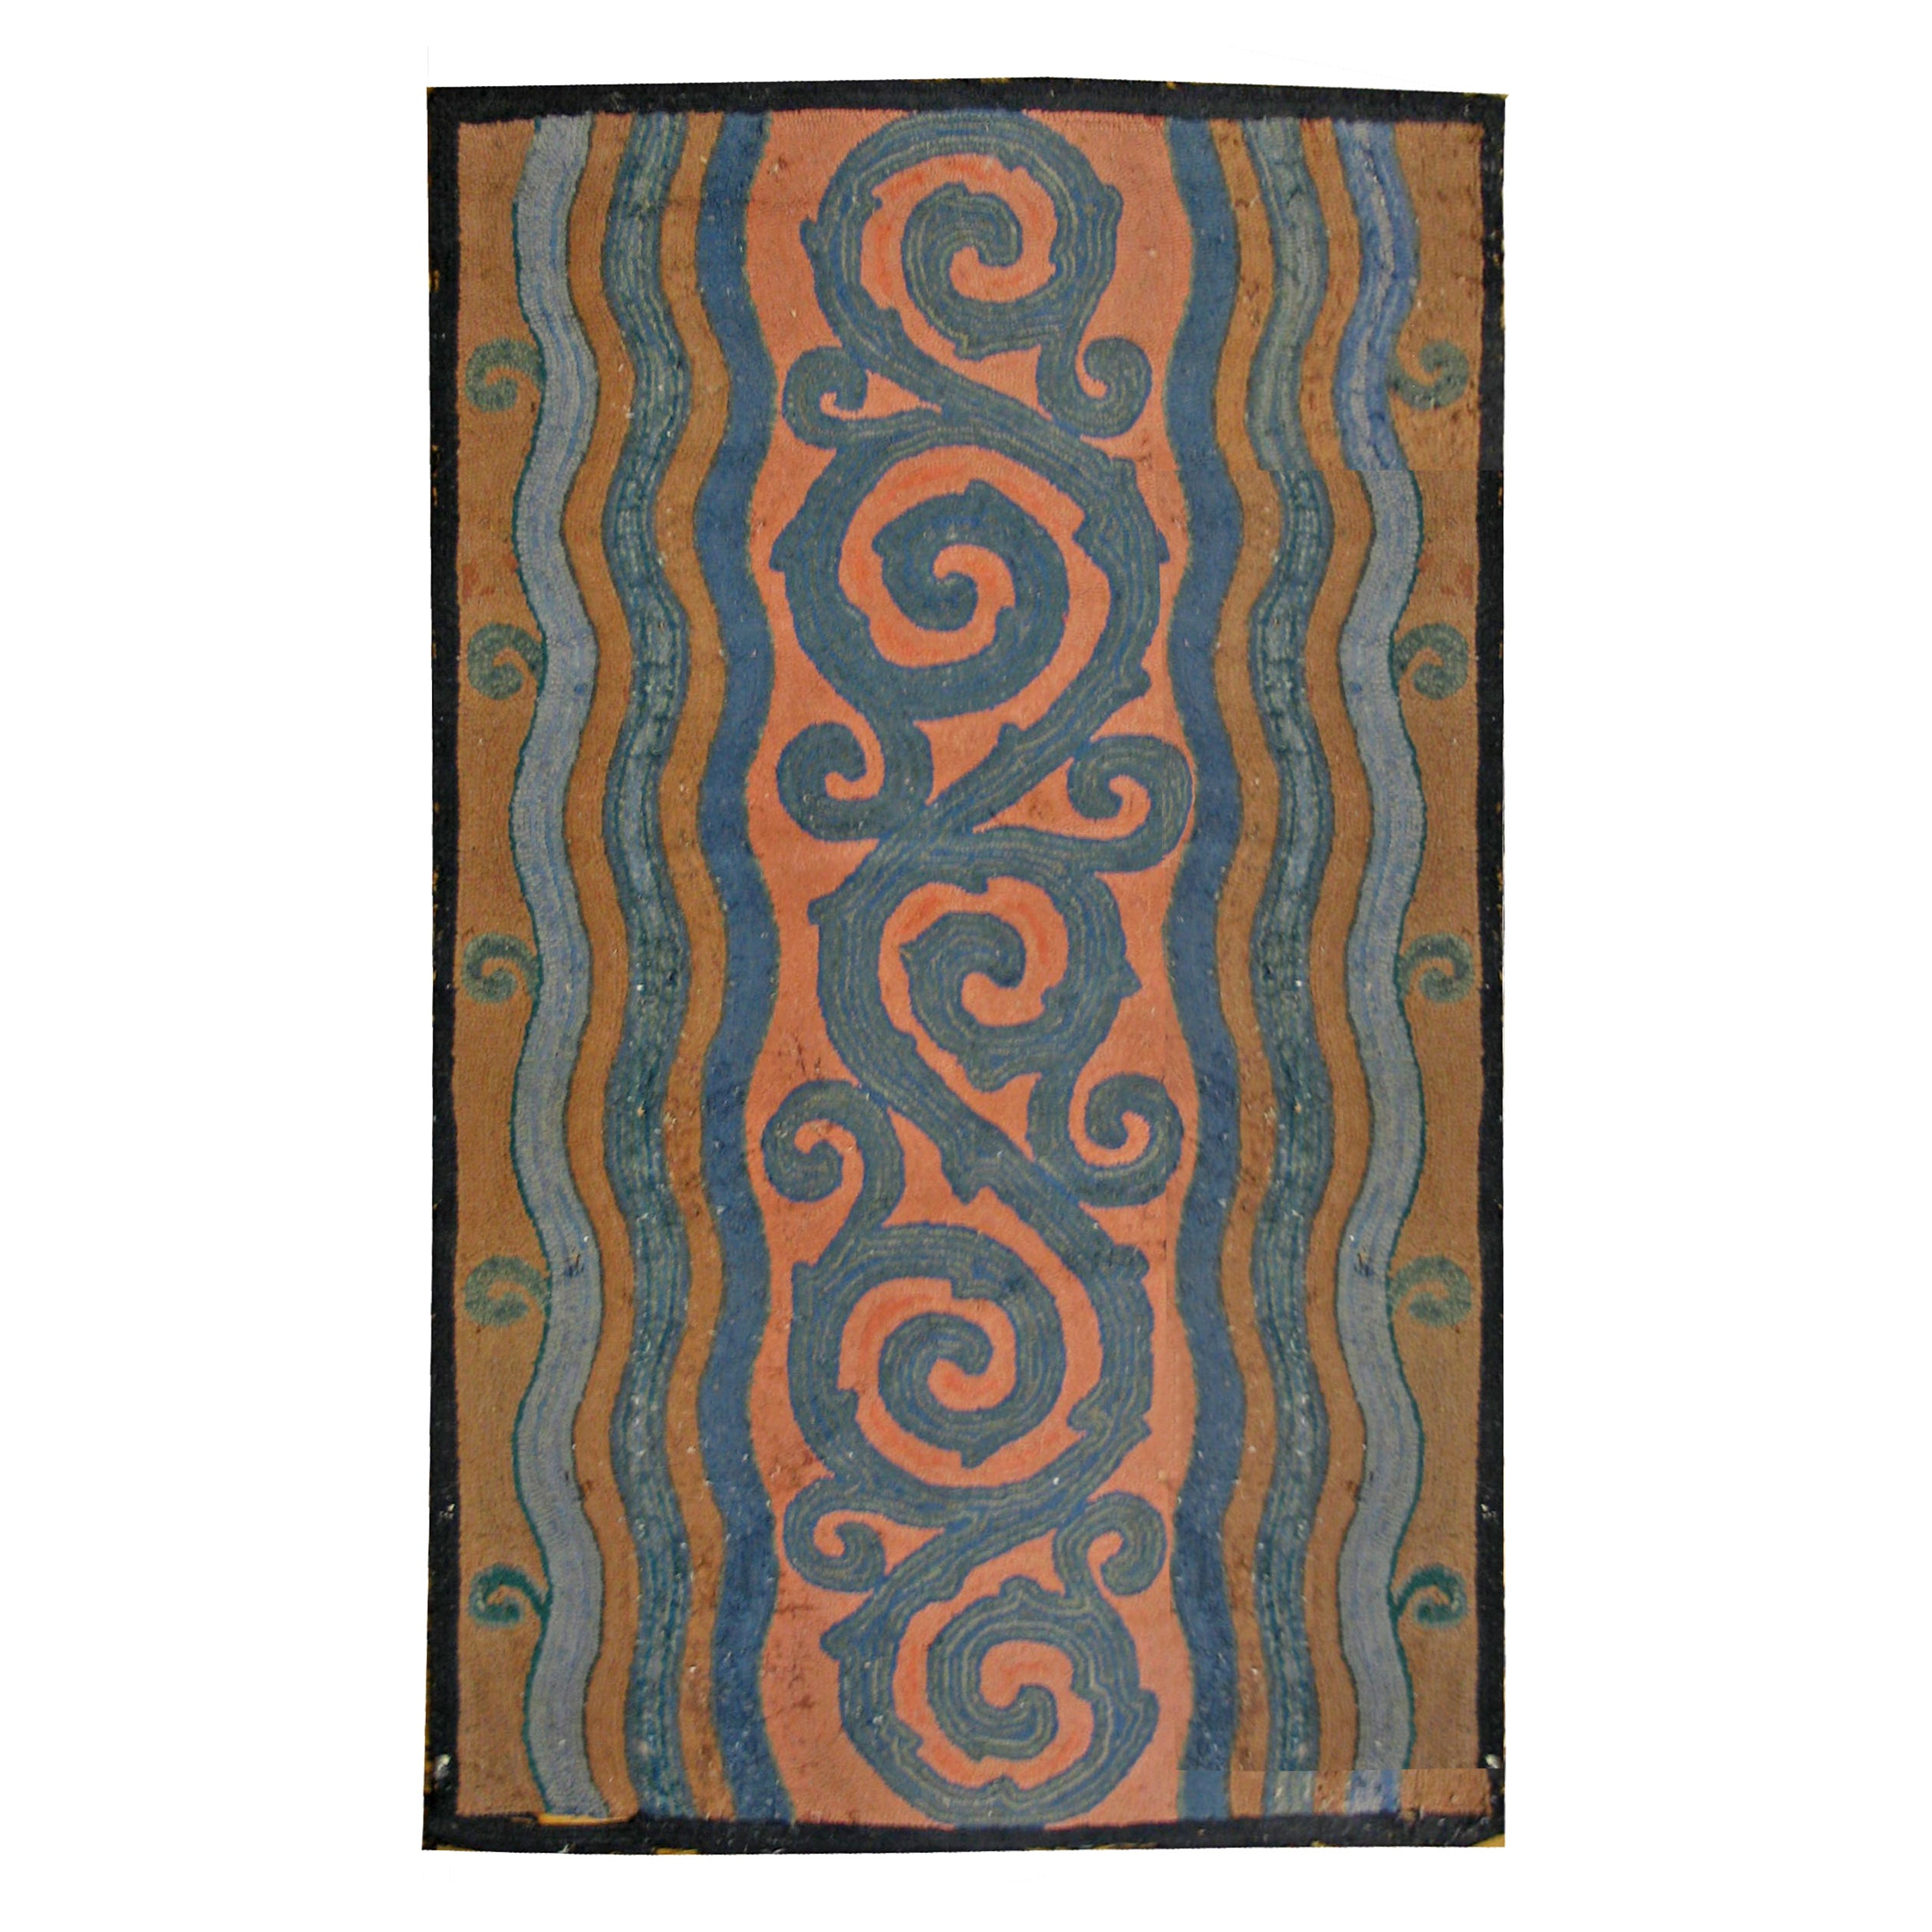 Early 20th Century American Hooked Rug ( 3' x 5'3" - 92 x 160 ) For Sale